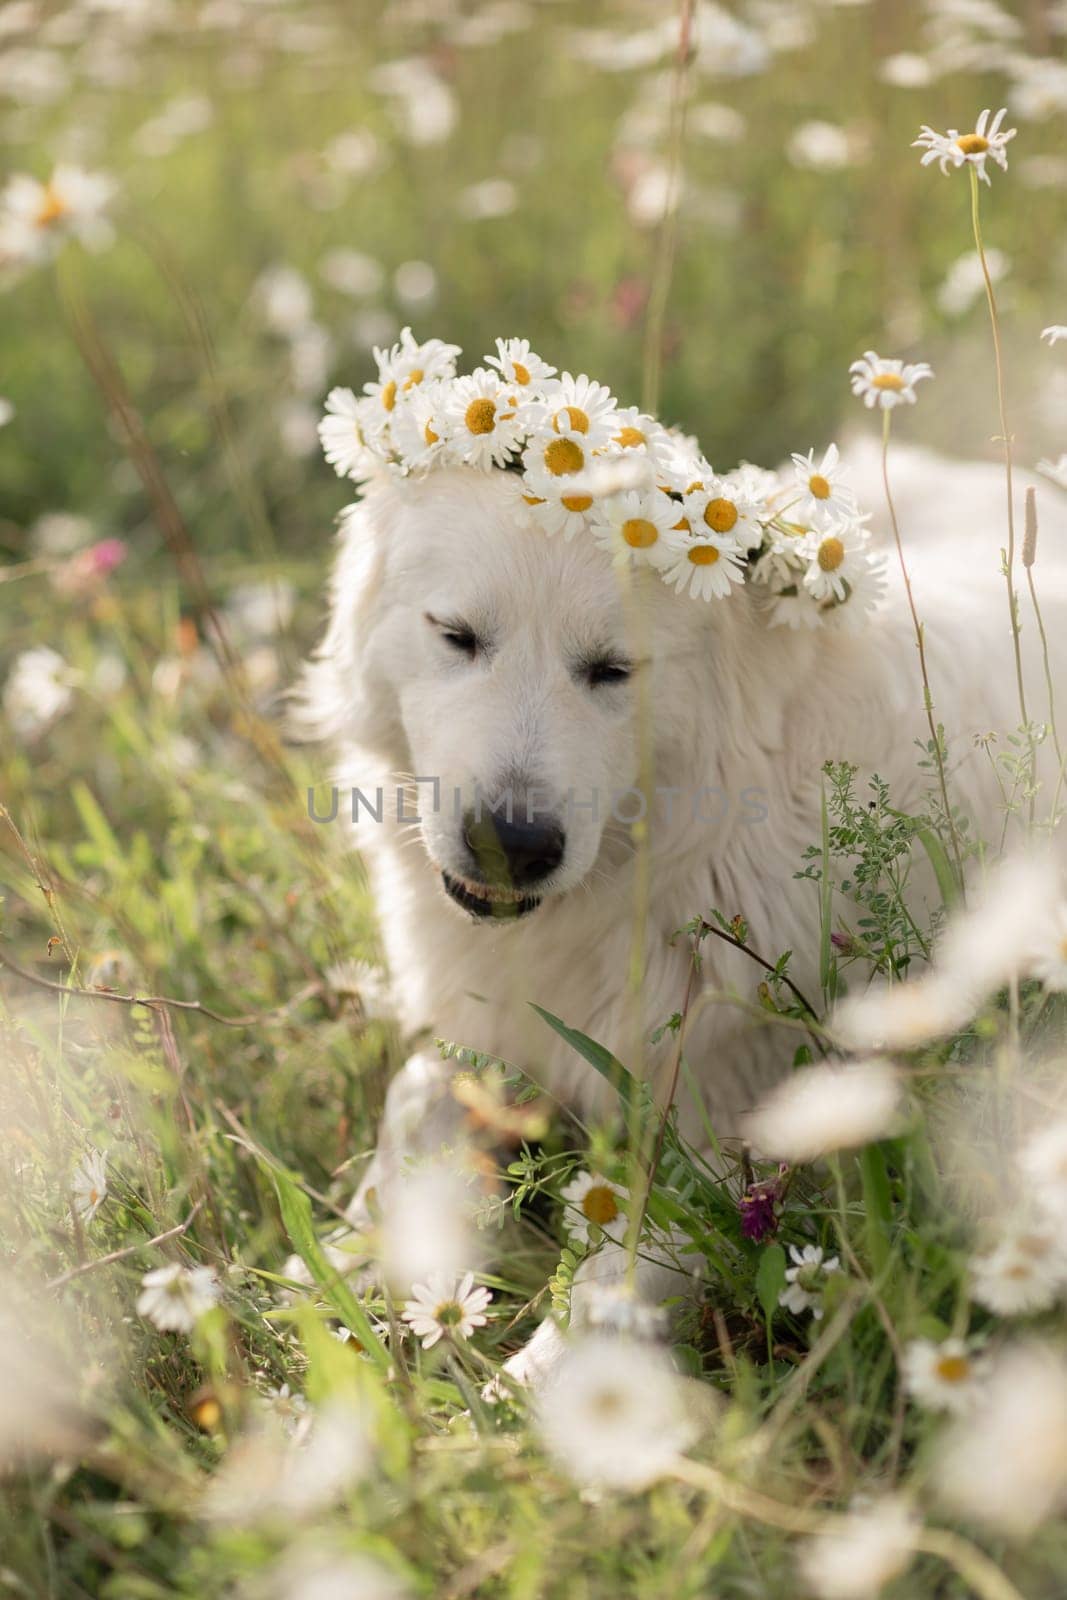 Daisies Maremma Sheepdog in a wreath of daisies sits on a green lawn with wild flowers daisies, walks a pet. Cute photo with a dog in a wreath of daisies